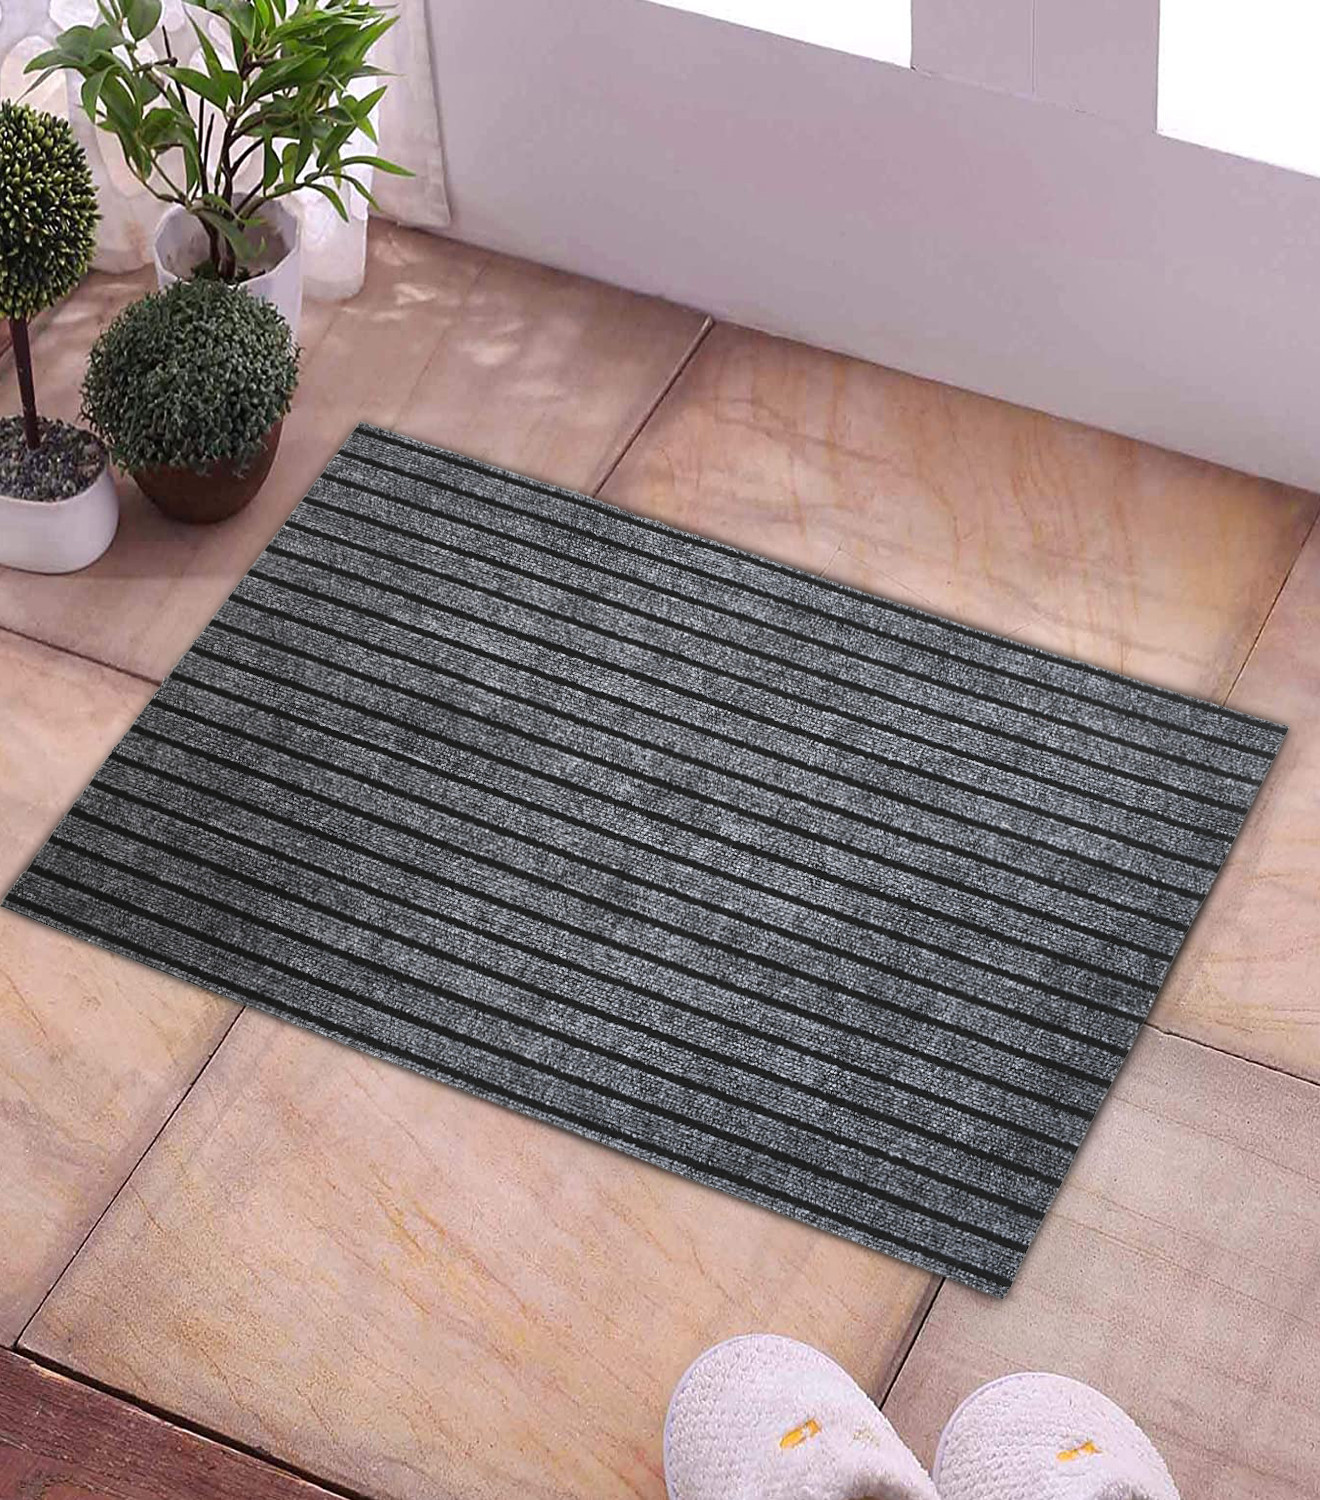 Kuber Industries All Weather Entry and Back Yard Door Mat, Non-Slip Rubber Backing, Absorbent and Waterproof, Dirt Trapping Rugs for Entryway -16